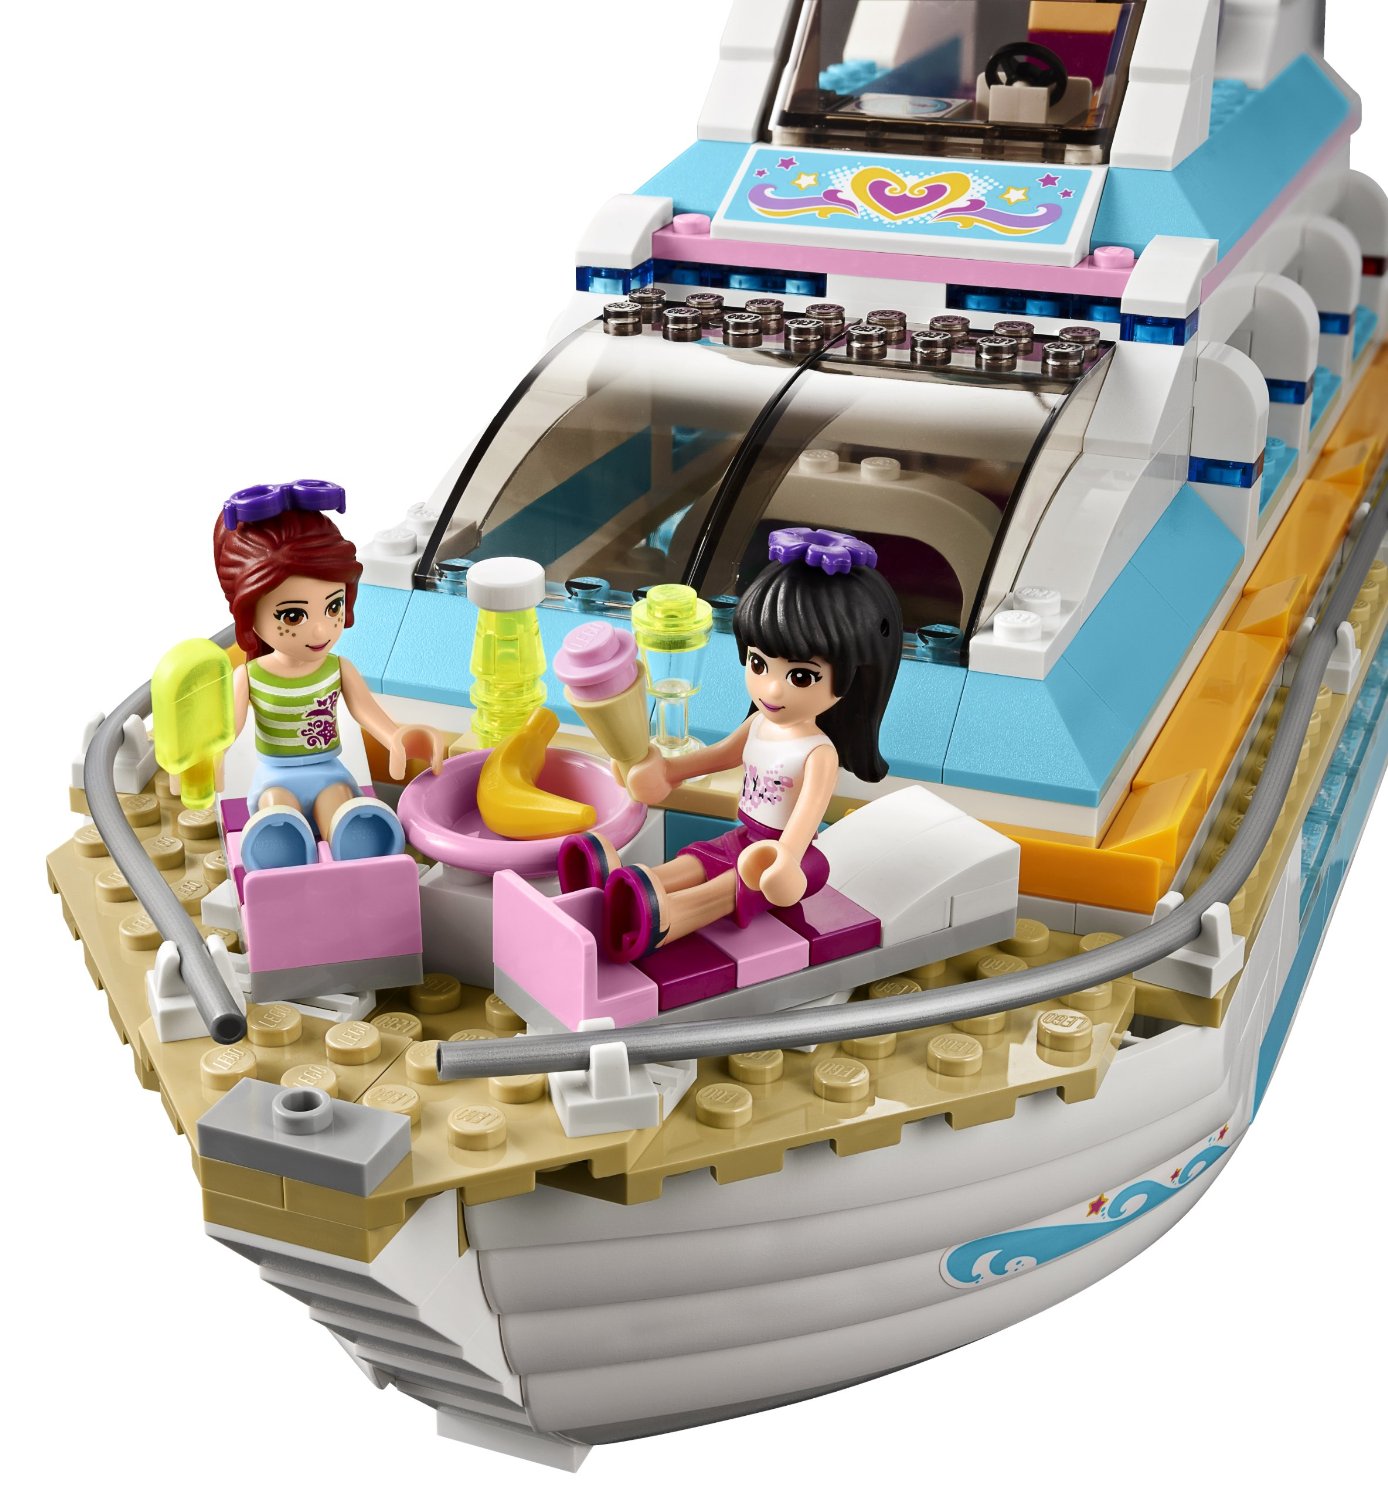 Shopping For LEGO Friends Dolphin Cruiser 41015 Building Kit?